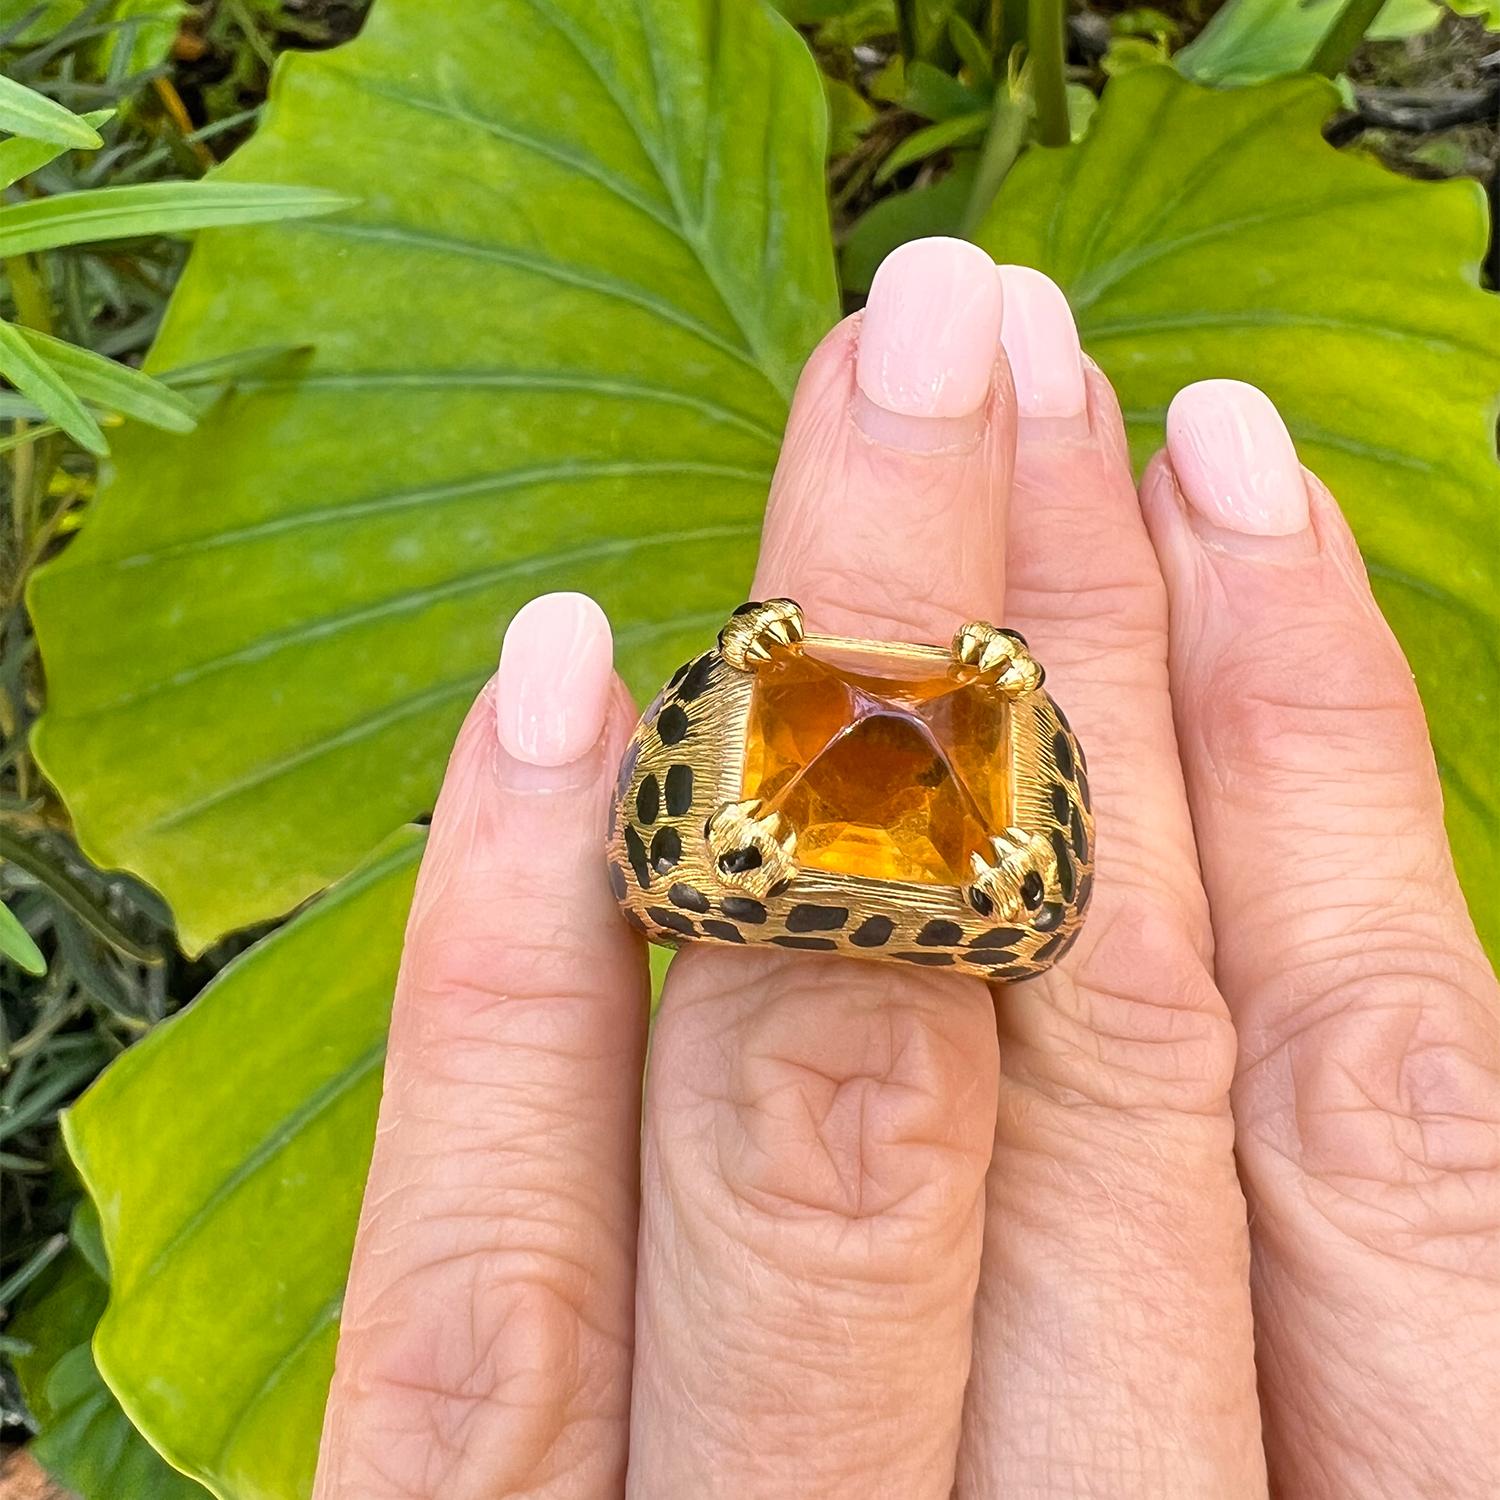 Domed cocktail ring, centering a sugarloaf cabochon-cut citrine set with leopard paw motif prongs, in textured 18k yellow gold decorated with black enamel leopard spots.  Citrine measuring approximately 12.5 x 10.5mm.  Signed 'Christian Dior' '750'